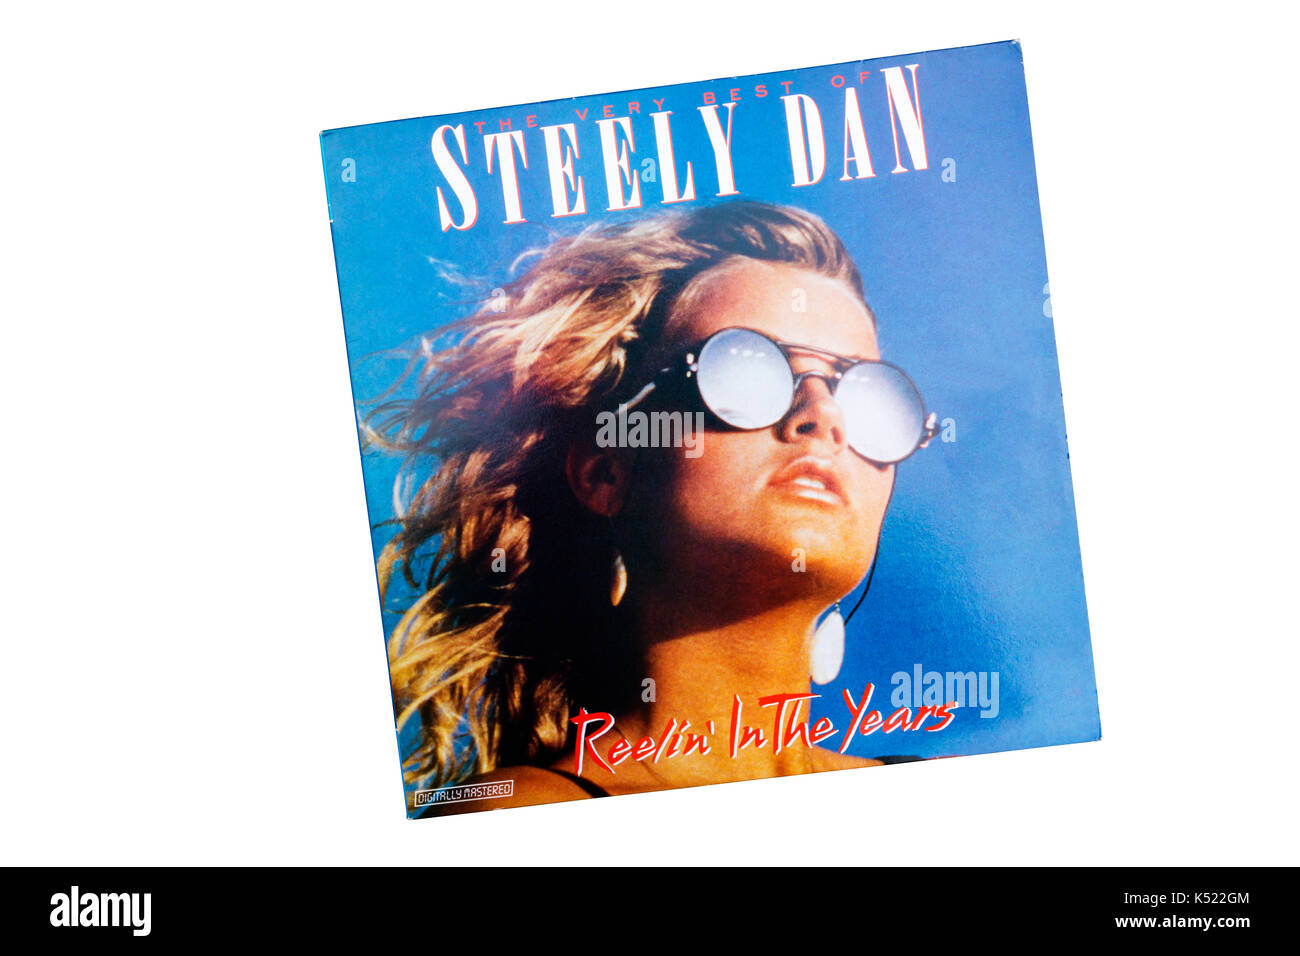 The Very Best of Steely Dan - Reelin' In The Years was a vinyl double LP compilation album released in 1985. Stock Photo